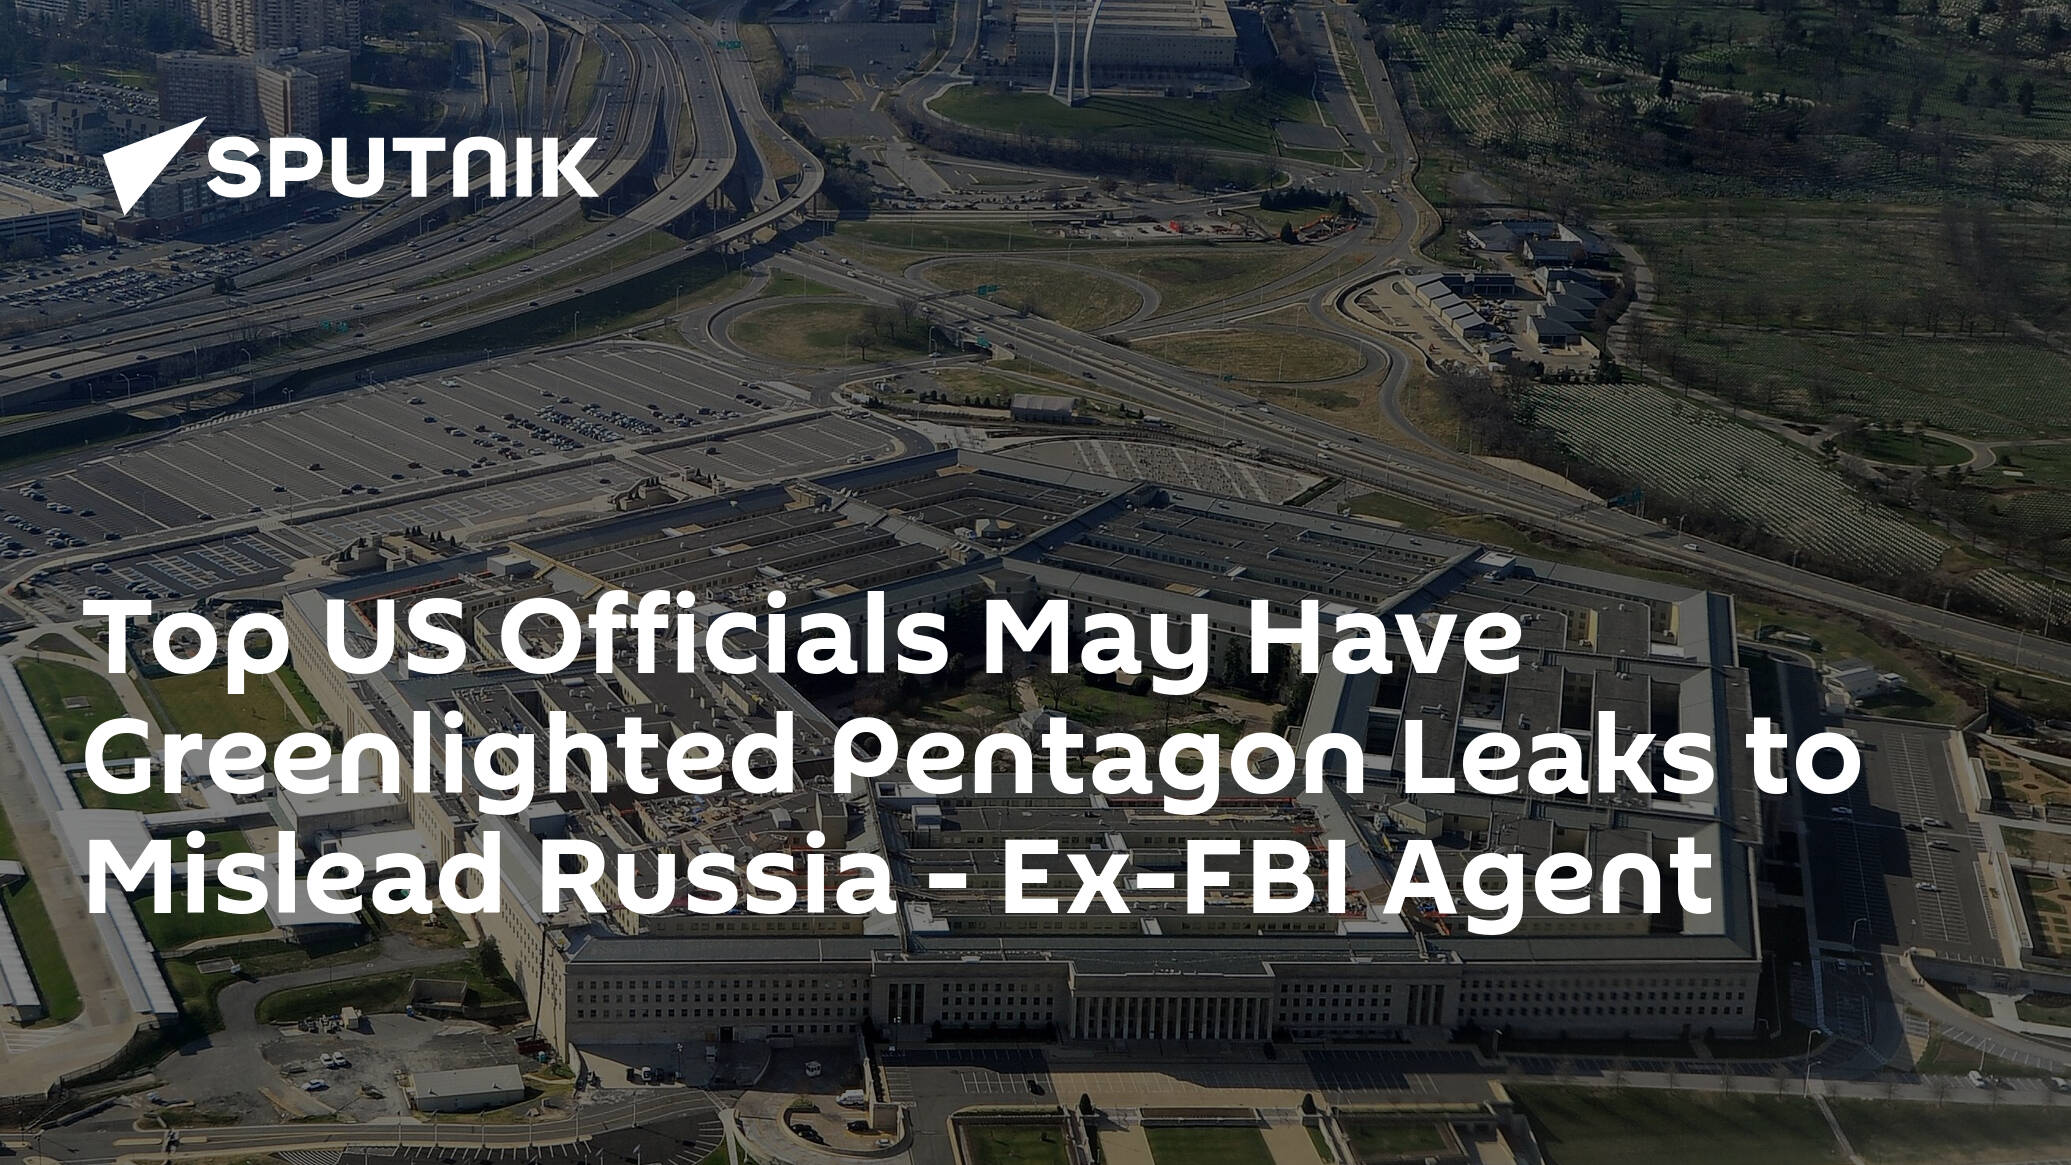 Top US Officials May Have Greenlighted Pentagon Leaks to Mislead Russia – Ex-FBI Agent